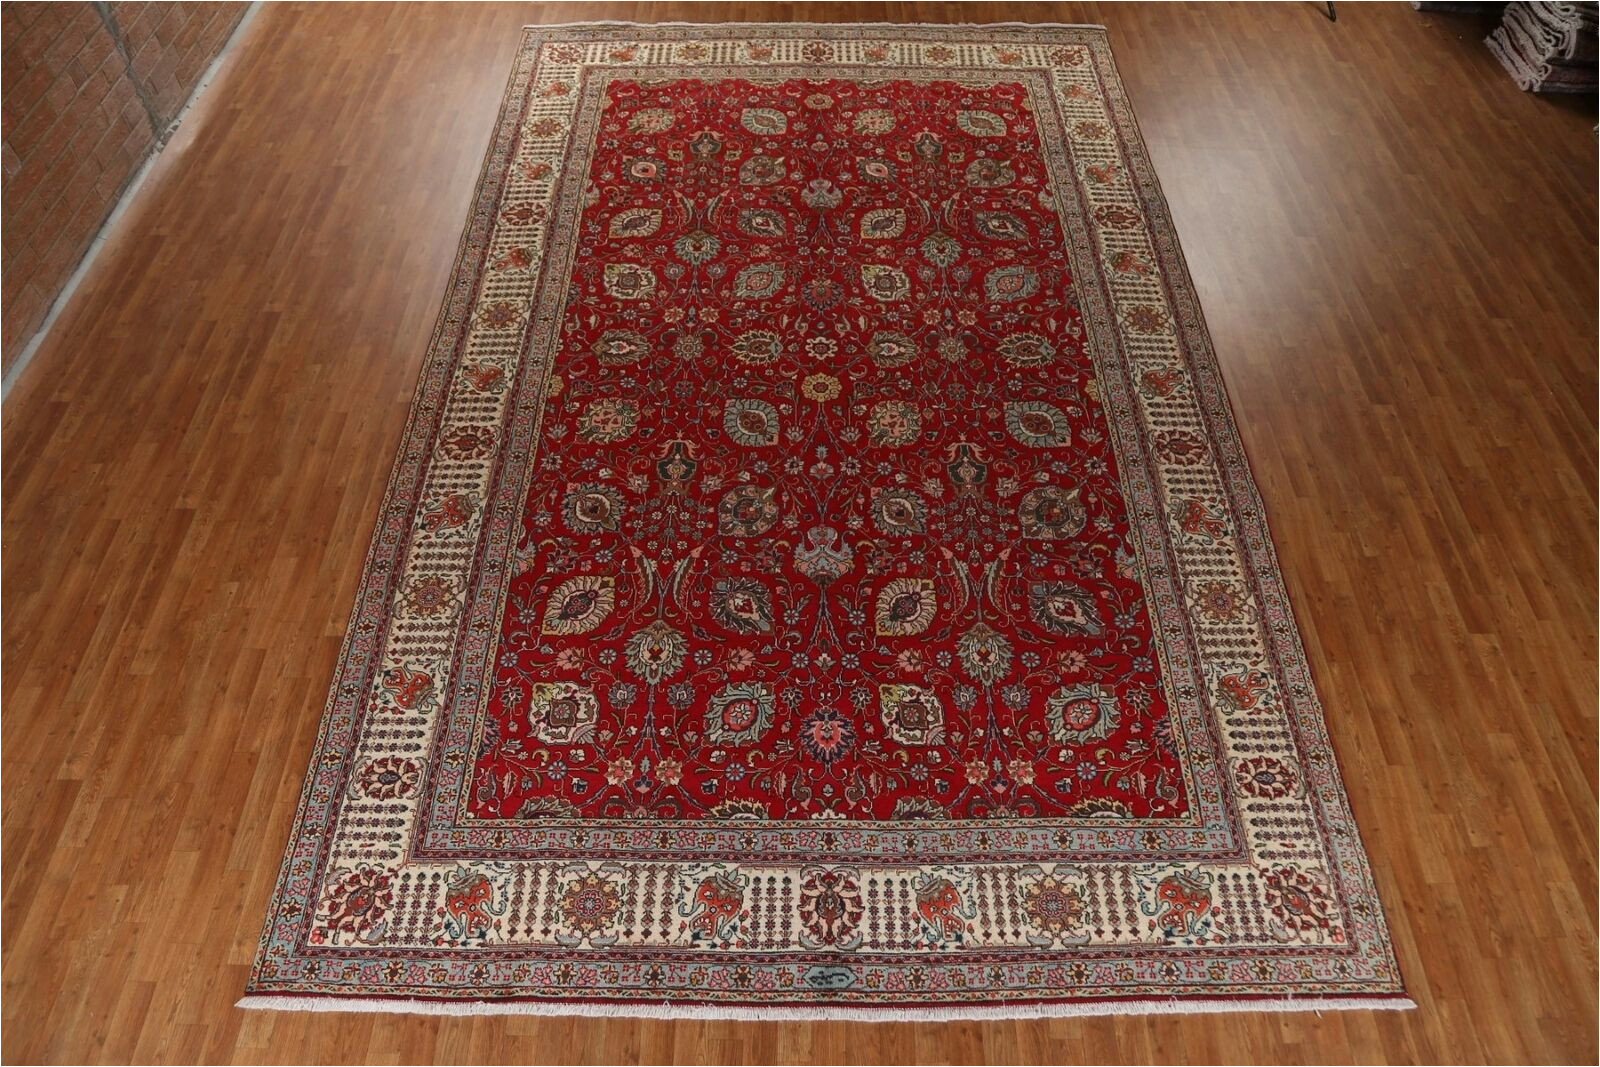 Large area Rugs 10 X 16 Vintage Floral Traditional Red area Rug 10×16 Ft Wool Hand-knotted Large Carpet